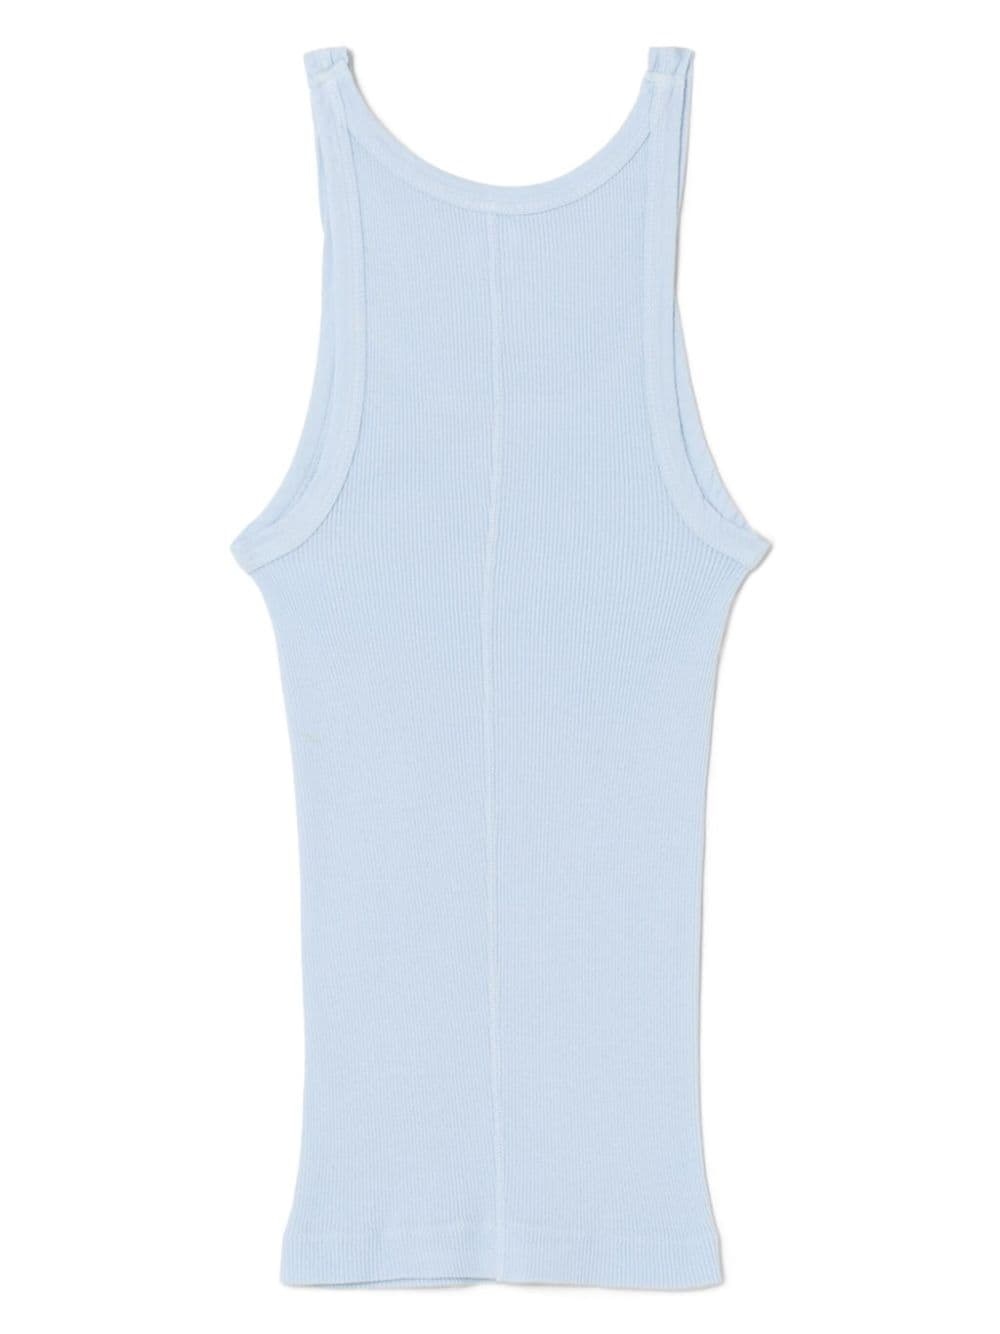 ribbed-knit cotton tank top - 2